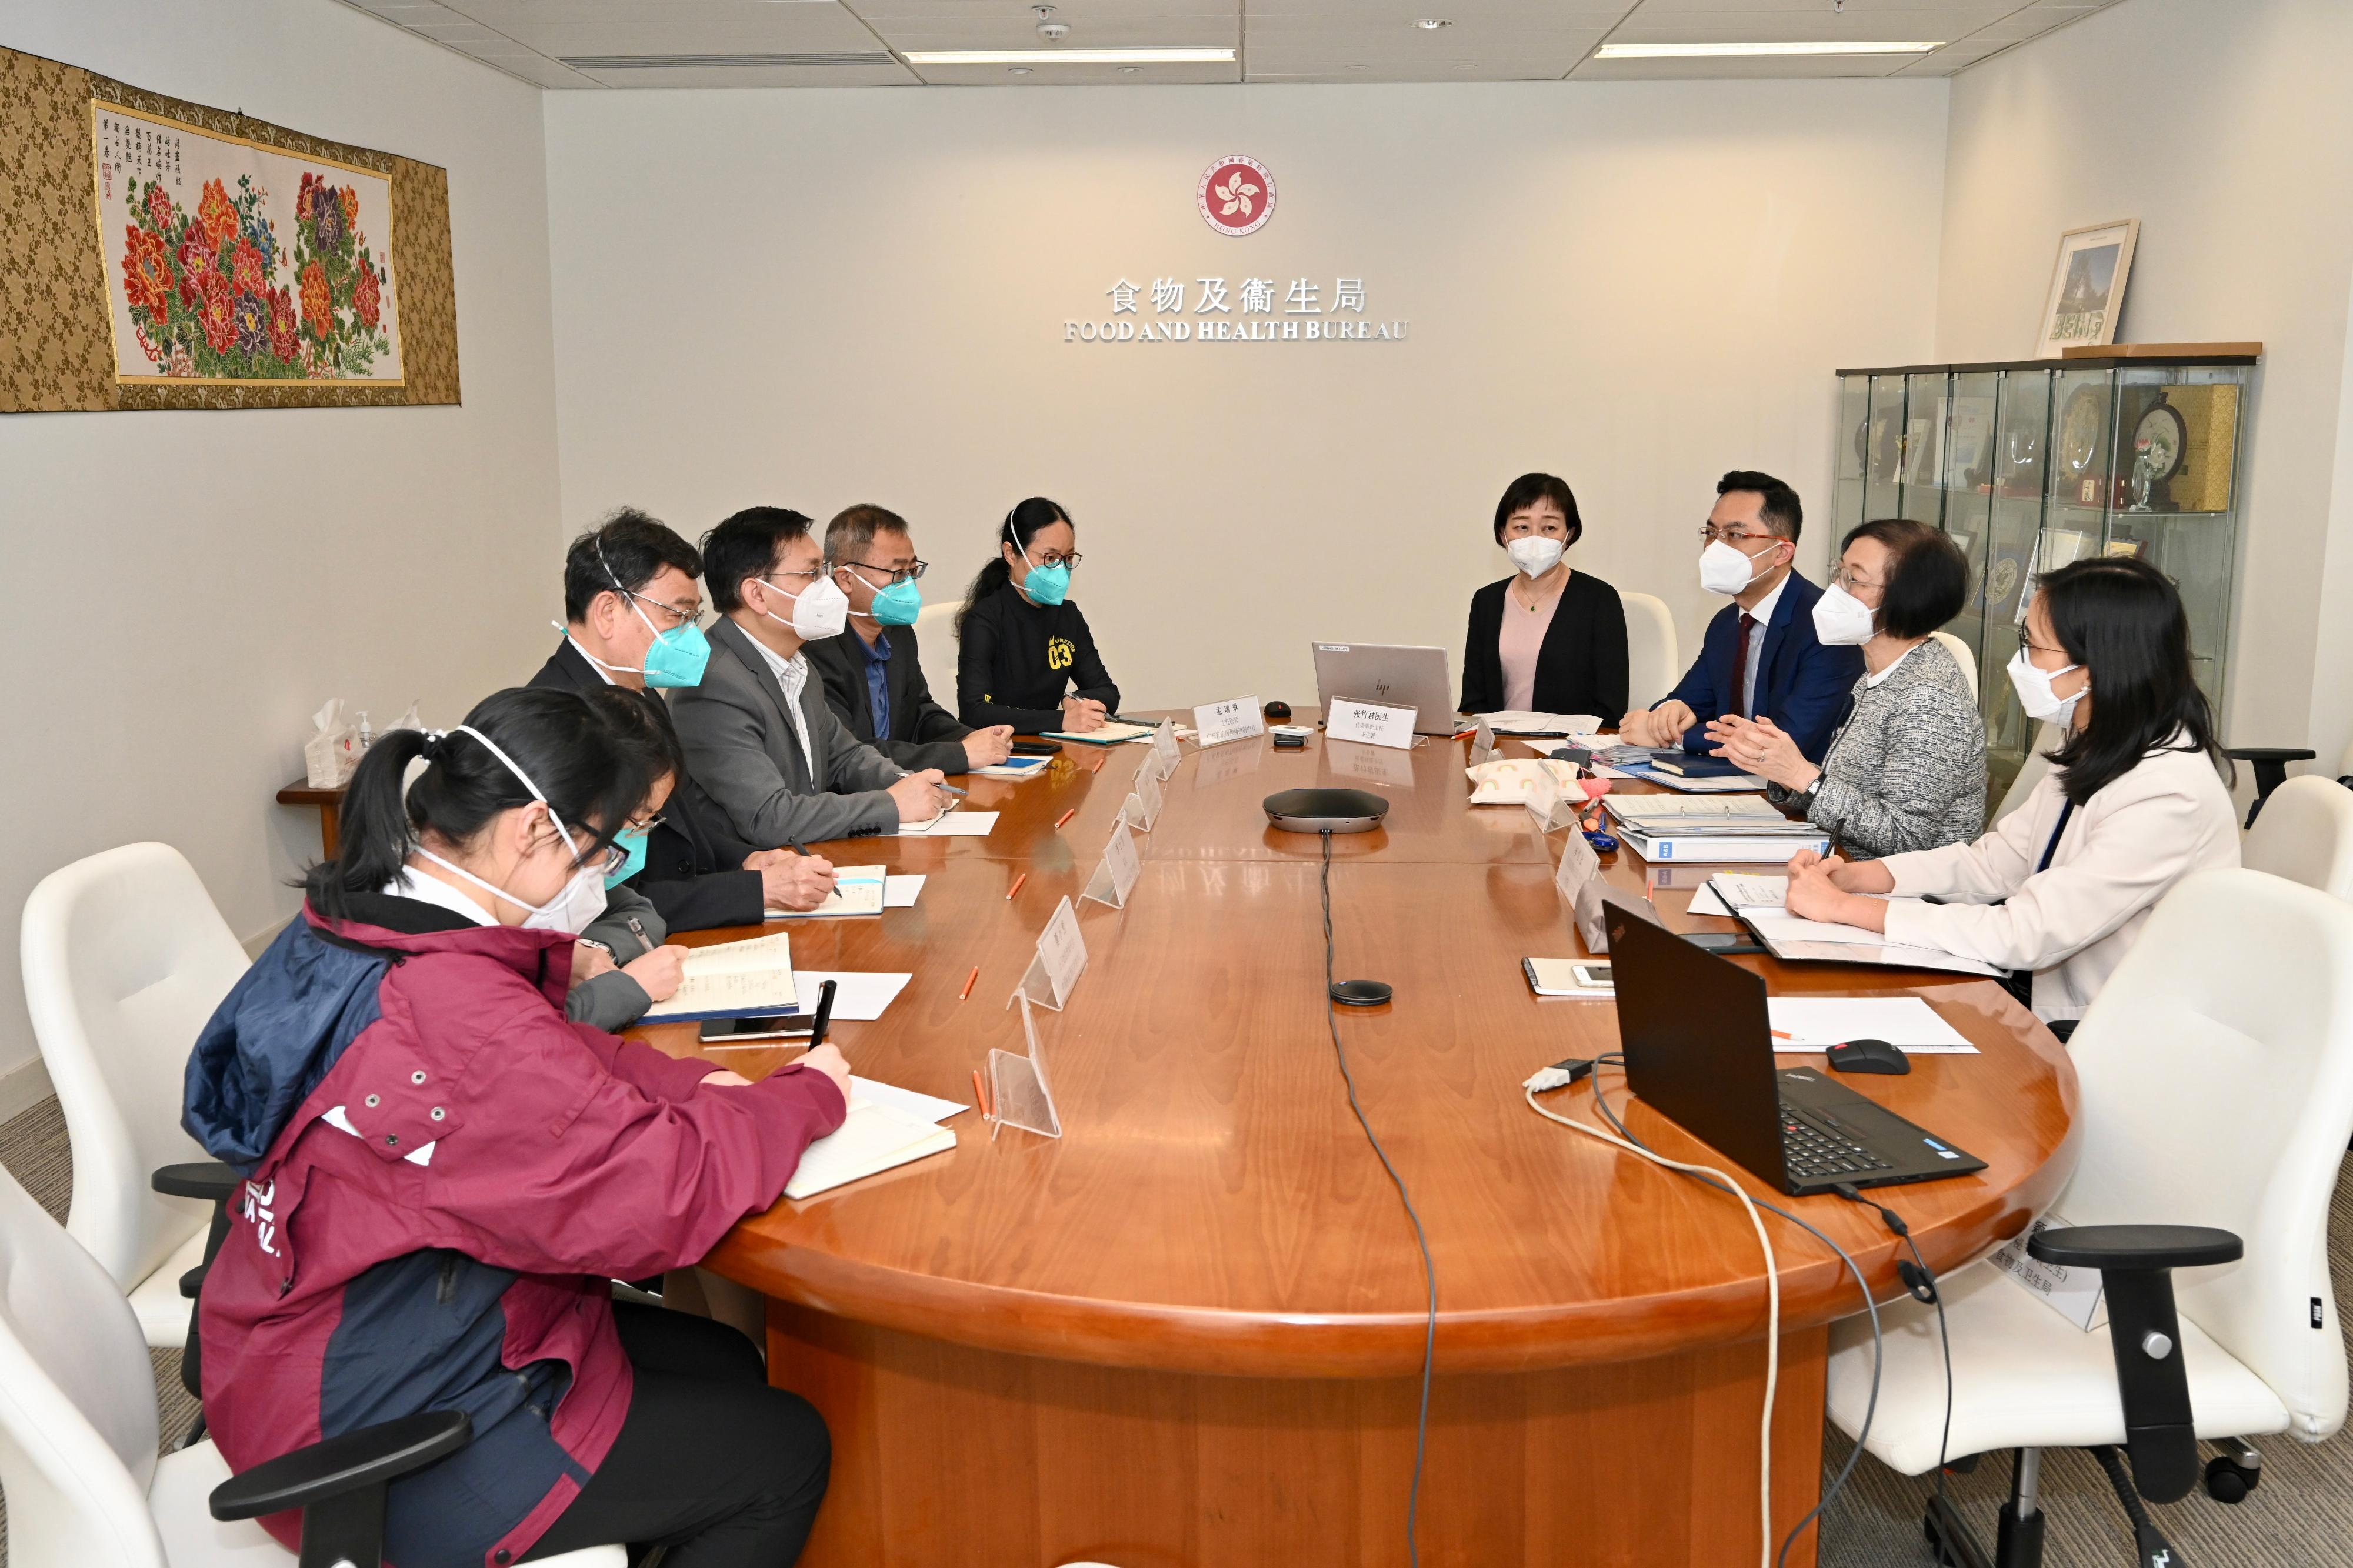 The Secretary for Food and Health, Professor Sophia Chan (second right), had a working meeting on the voluntary rapid antigen test and the prevention and control strategies in residential care homes for the elderly with the Mainland epidemic prevention and control experts led by the Director of the National Institute for Communicable Disease Control and Prevention of the Chinese Center for Disease Control and Prevention, Mr Kan Biao (fourth left), at the Central Government Offices today (April 13). The Director of Health, Dr Ronald Lam (third right) and the Head of the Communicable Disease Branch of the Centre for Health Protection of the Department of Health, Dr Chuang Shuk-kwan (fourth right) also attended.